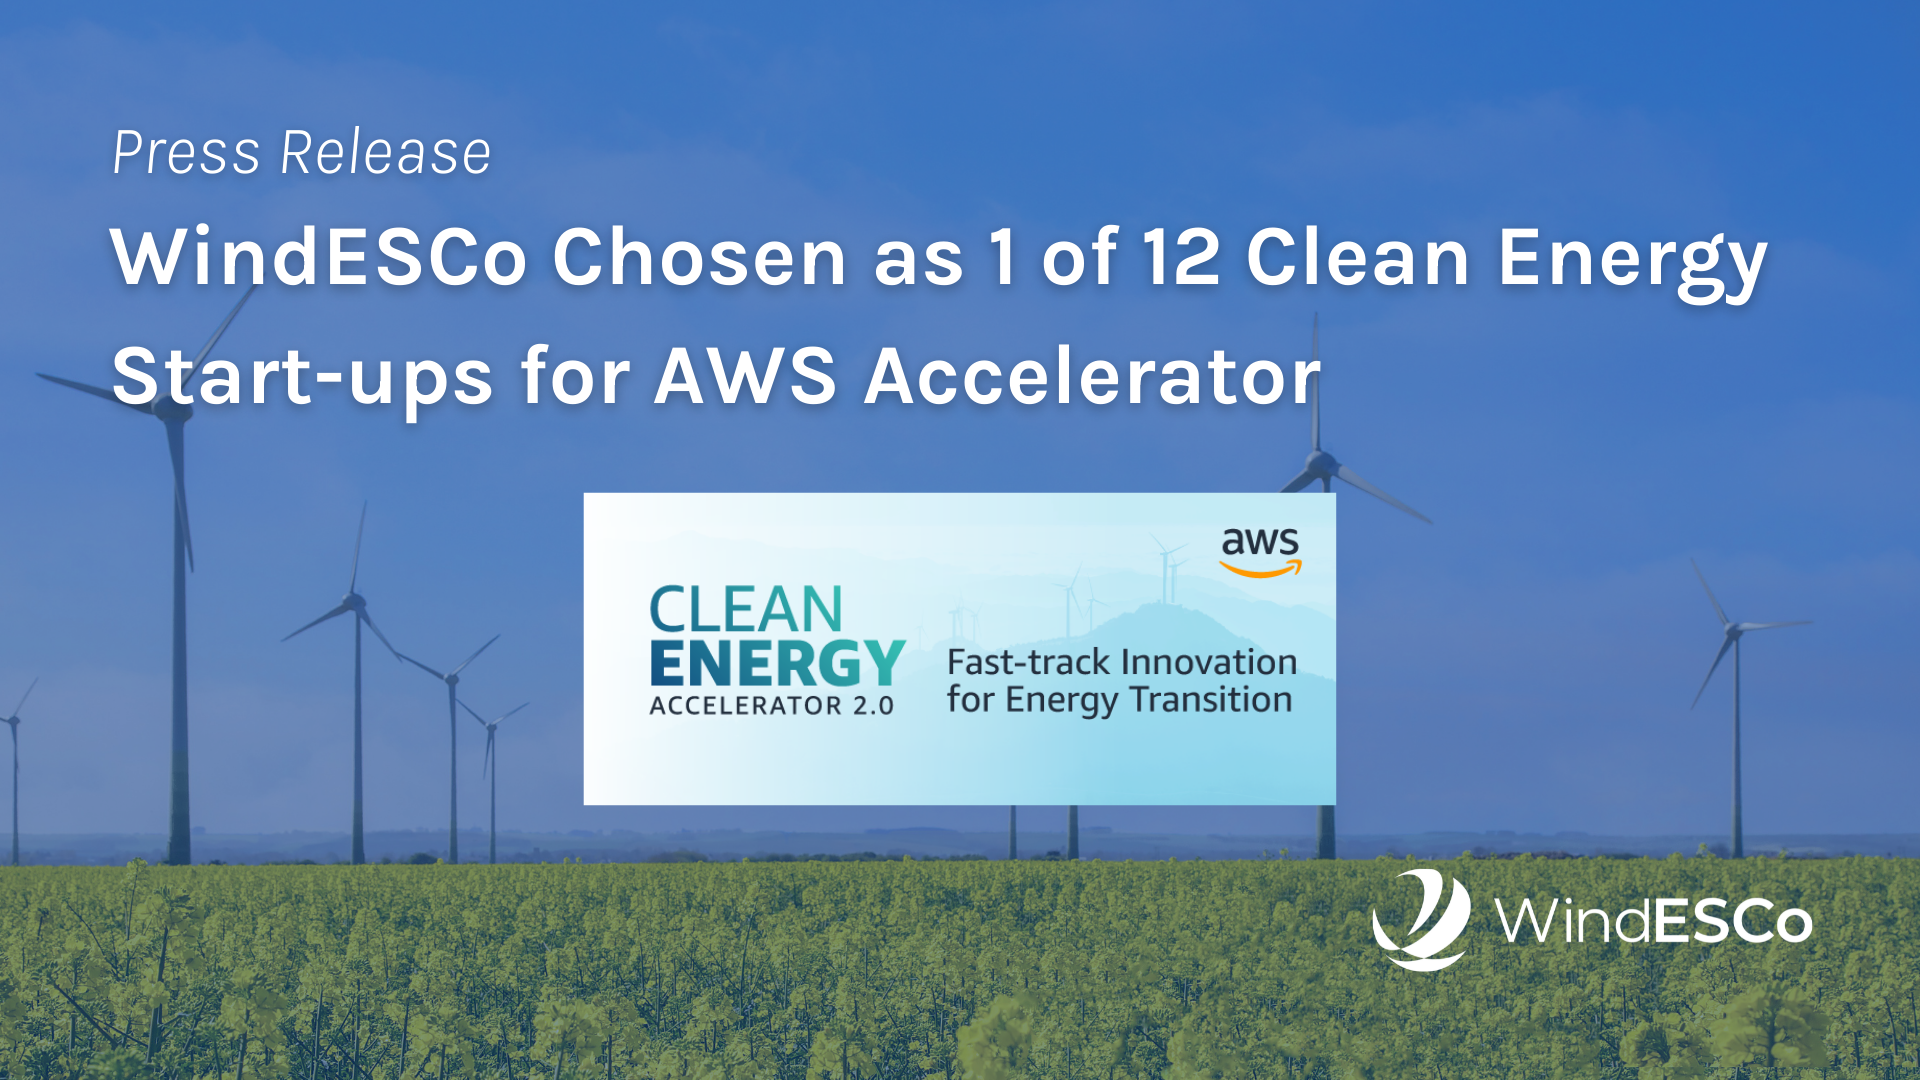 WindESCo accepted into AWS Accelerator as clean energy startup